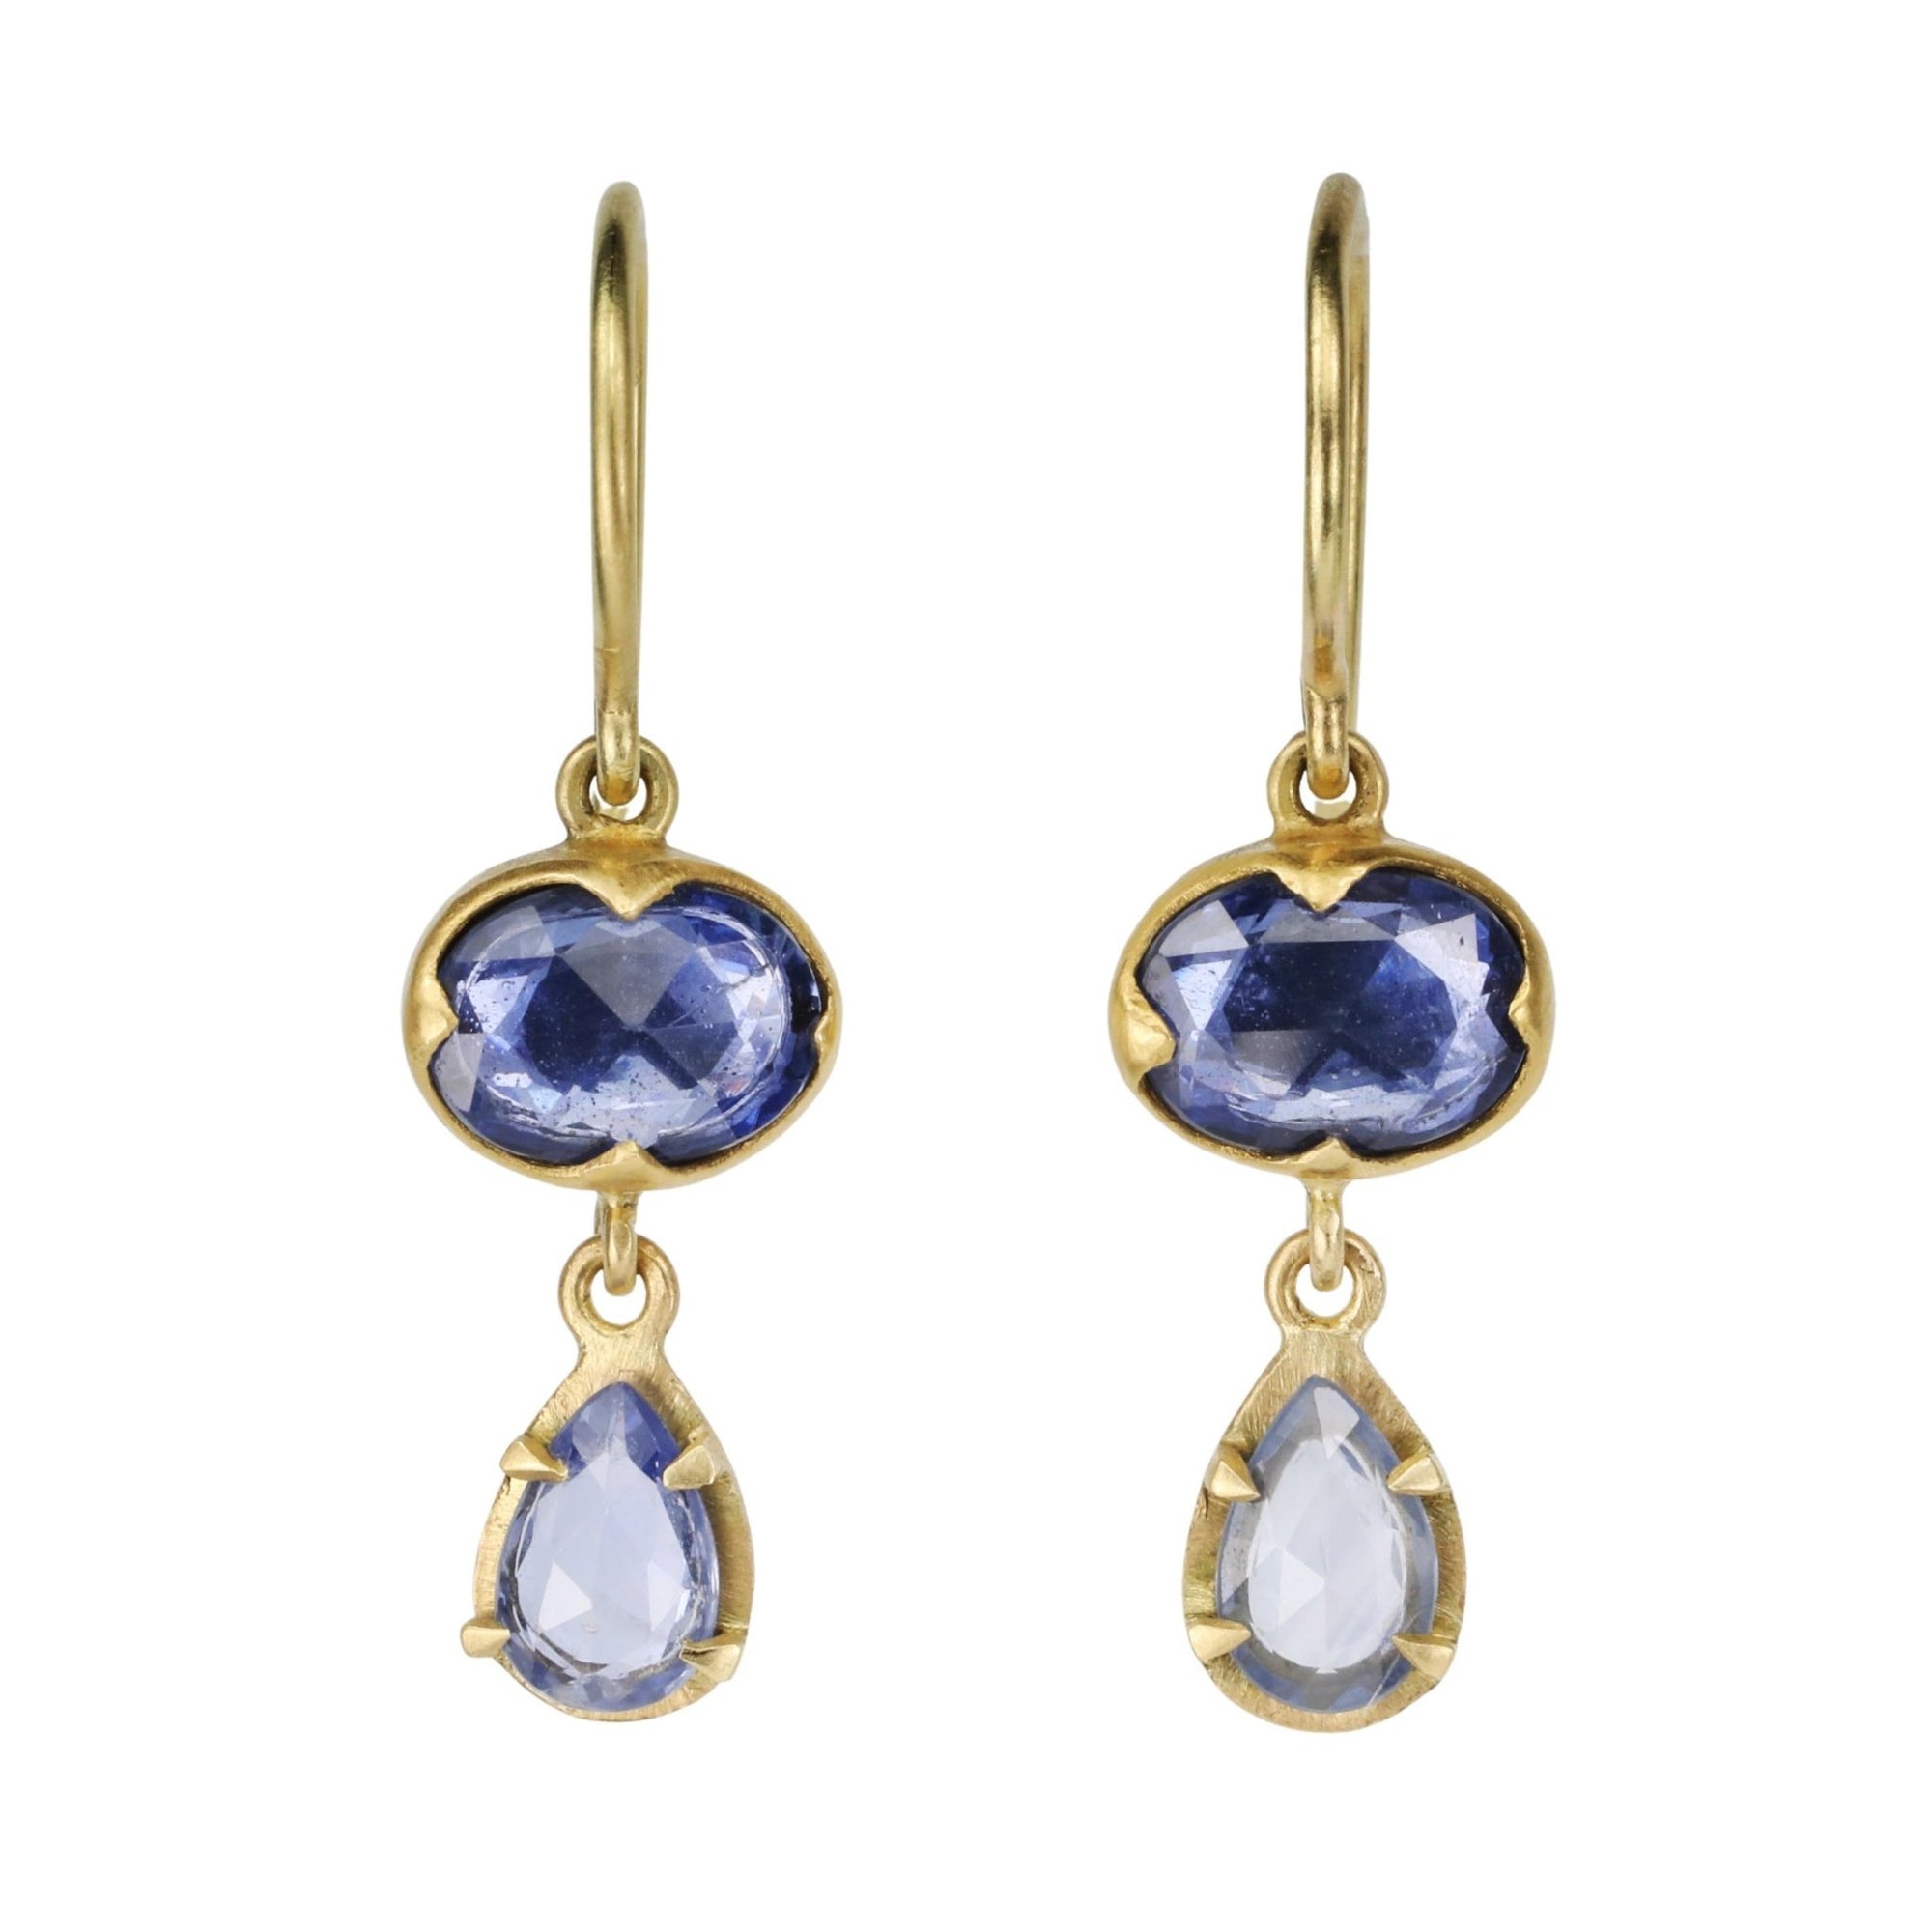 Annie Fensterstock Gold Double Drop Earrings with Blue Sapphires